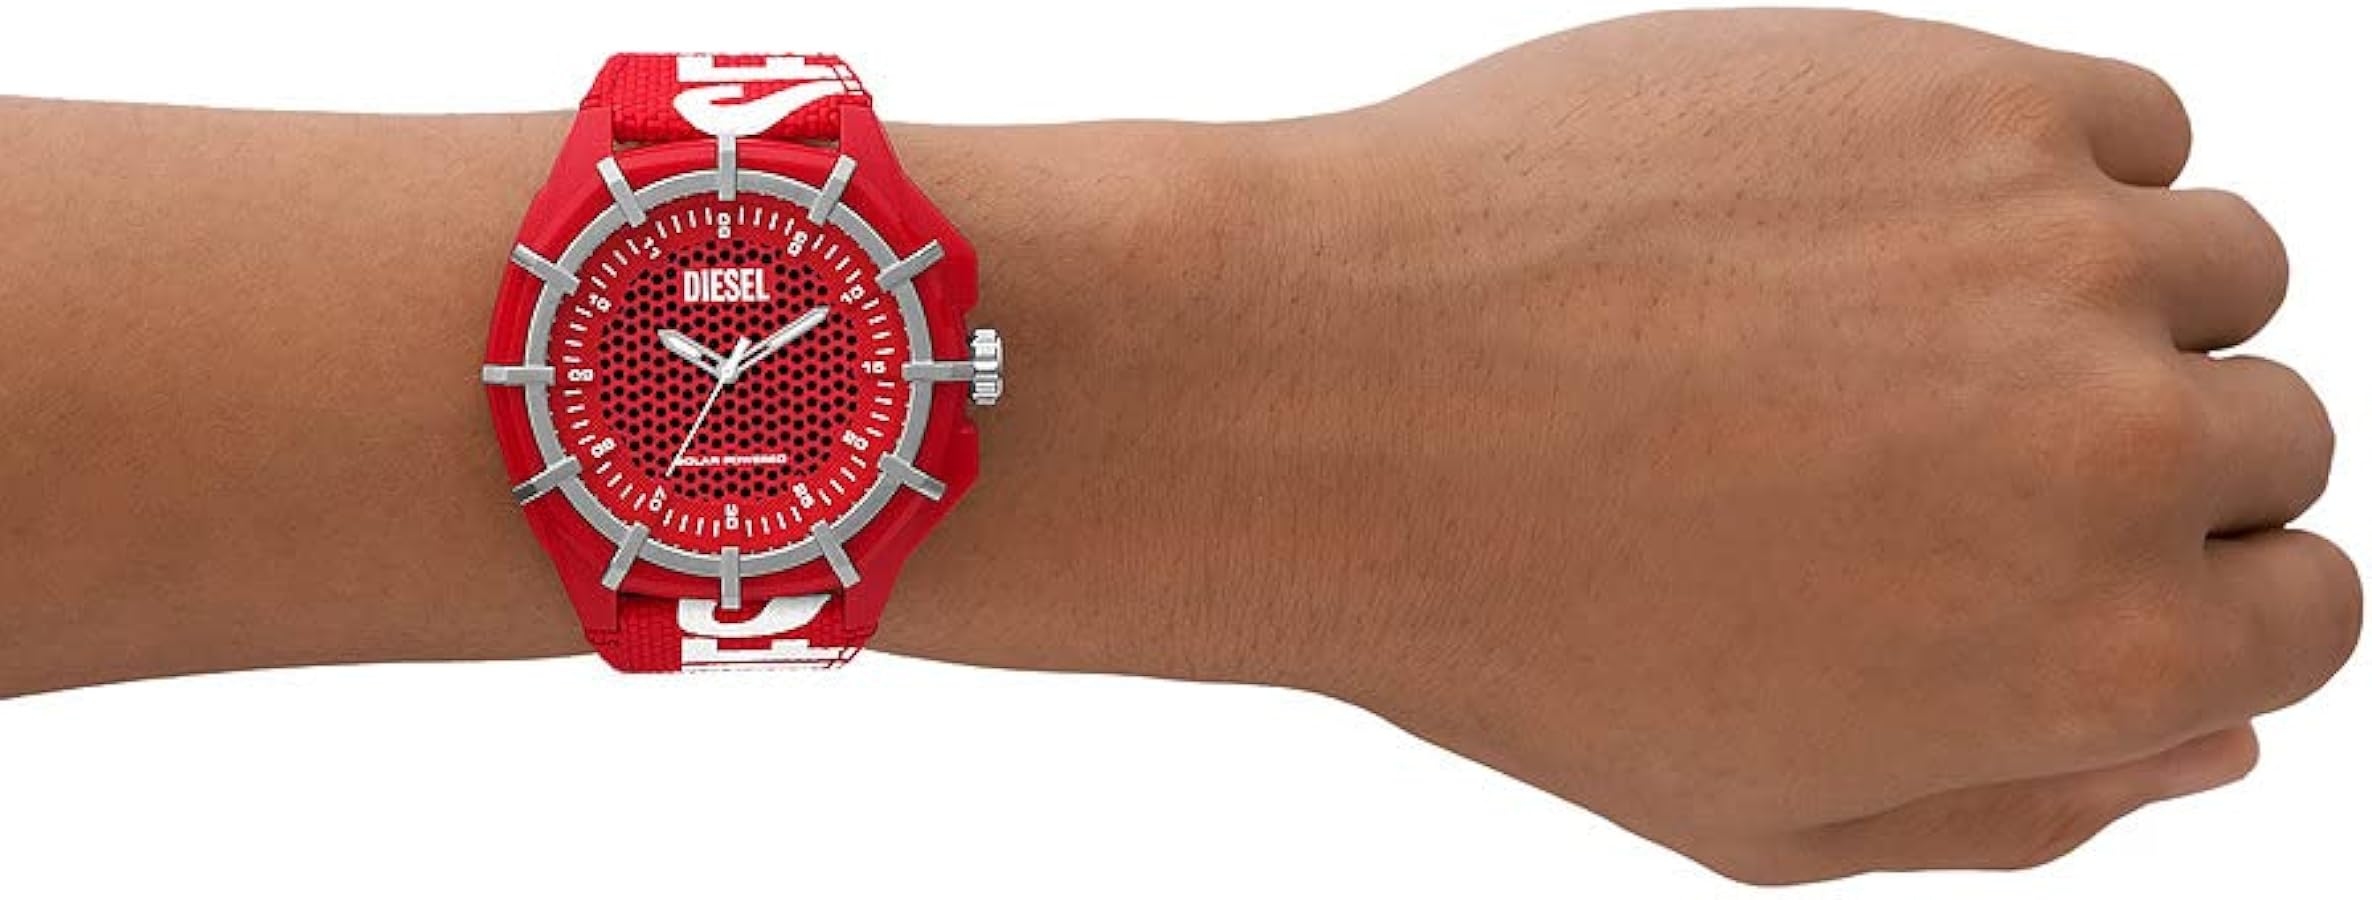 Diesel Watch for Men Framed, Solar Powered Three Hand Movement, 51 mm Red  Castor Oil Case with a Pro-Planet Textile Strap, DZ4621 : Amazon.co.uk:  Fashion